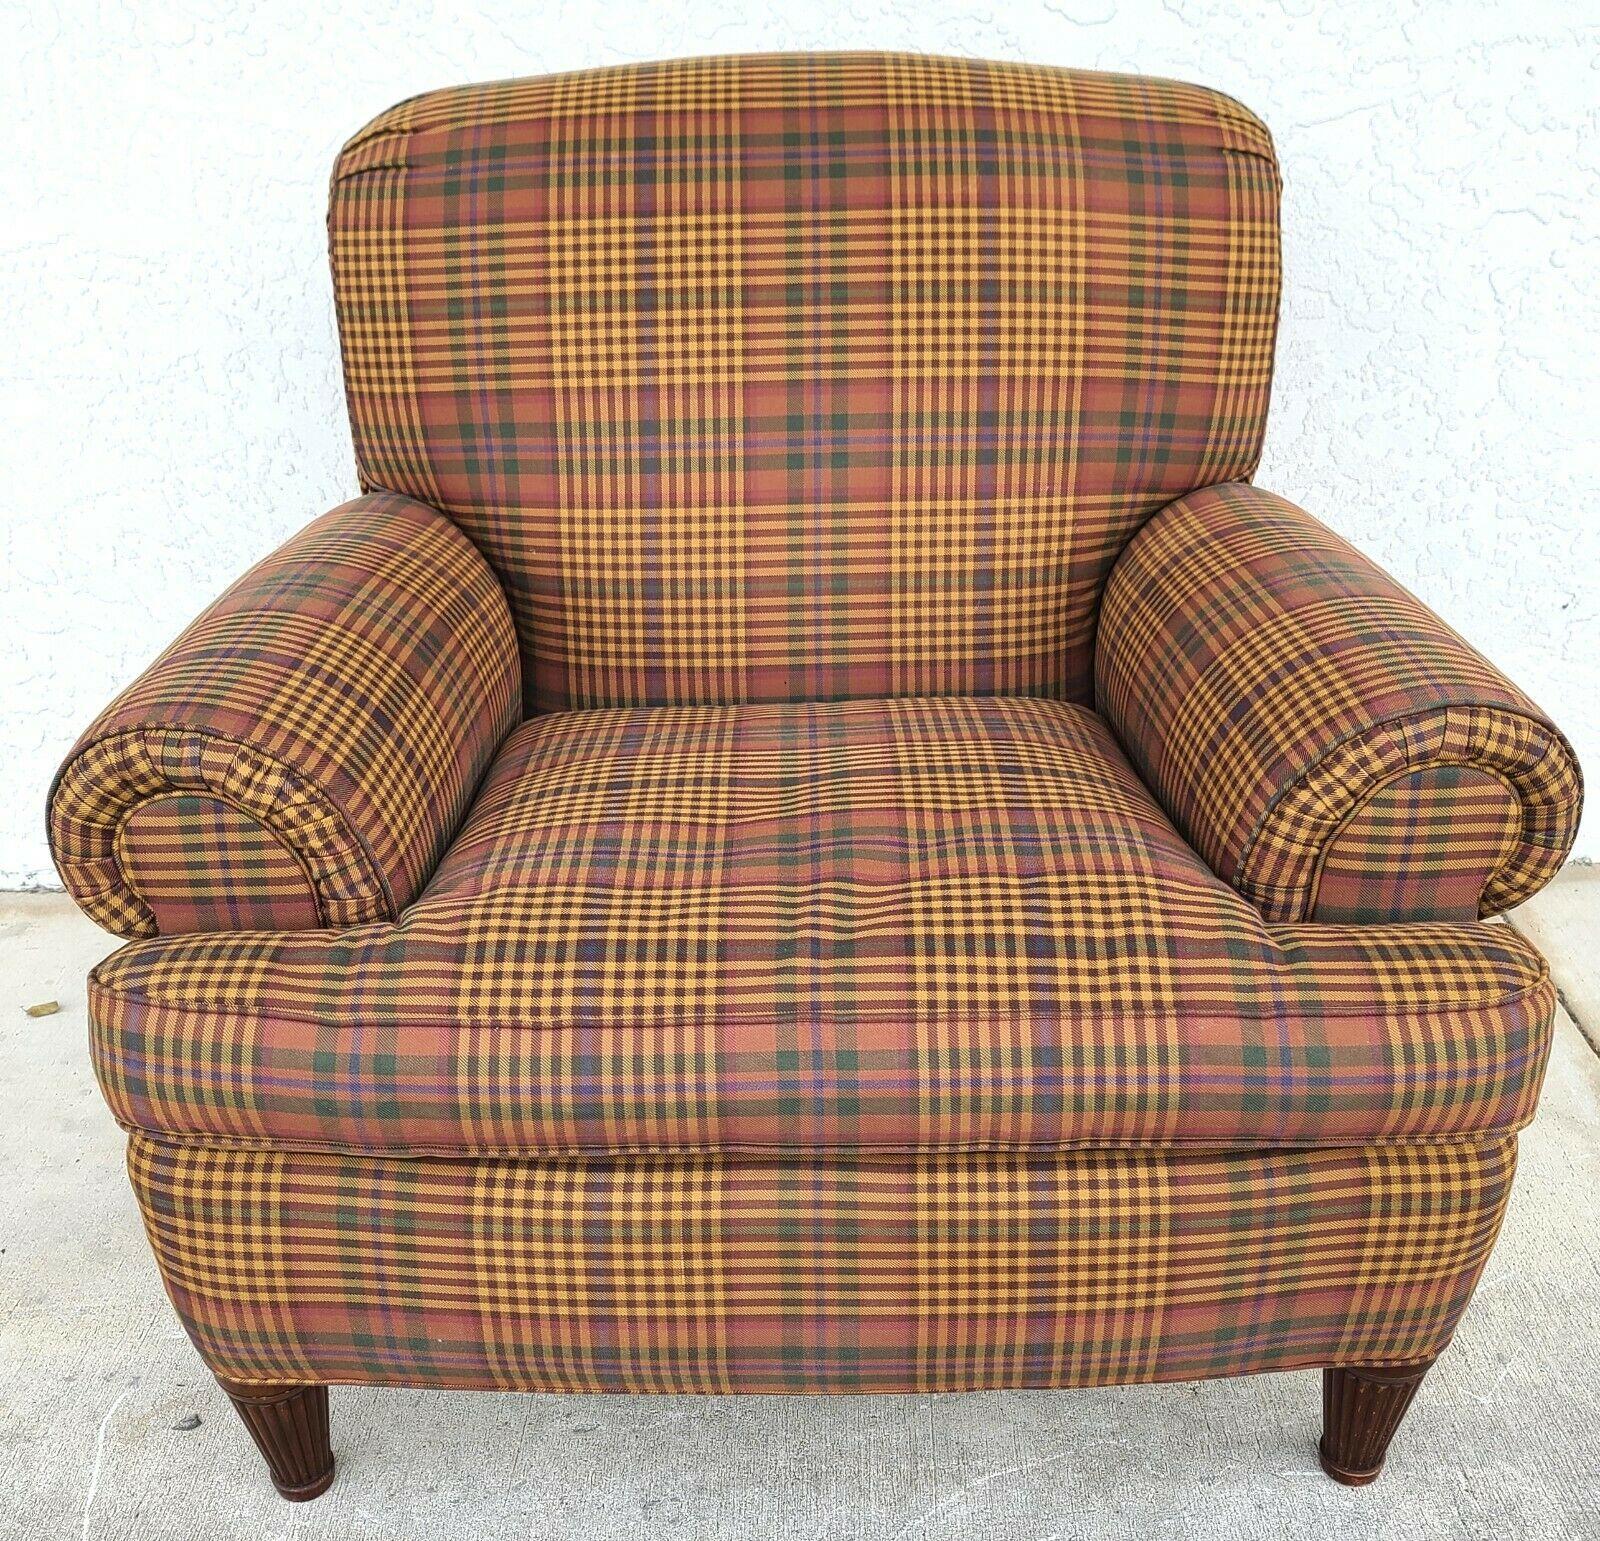 Offering one of our recent palm beach estate fine furniture acquisitions of a 
Ralph Lauren plaid library reading armchair with arm covers

Approximate measurements in inches
38